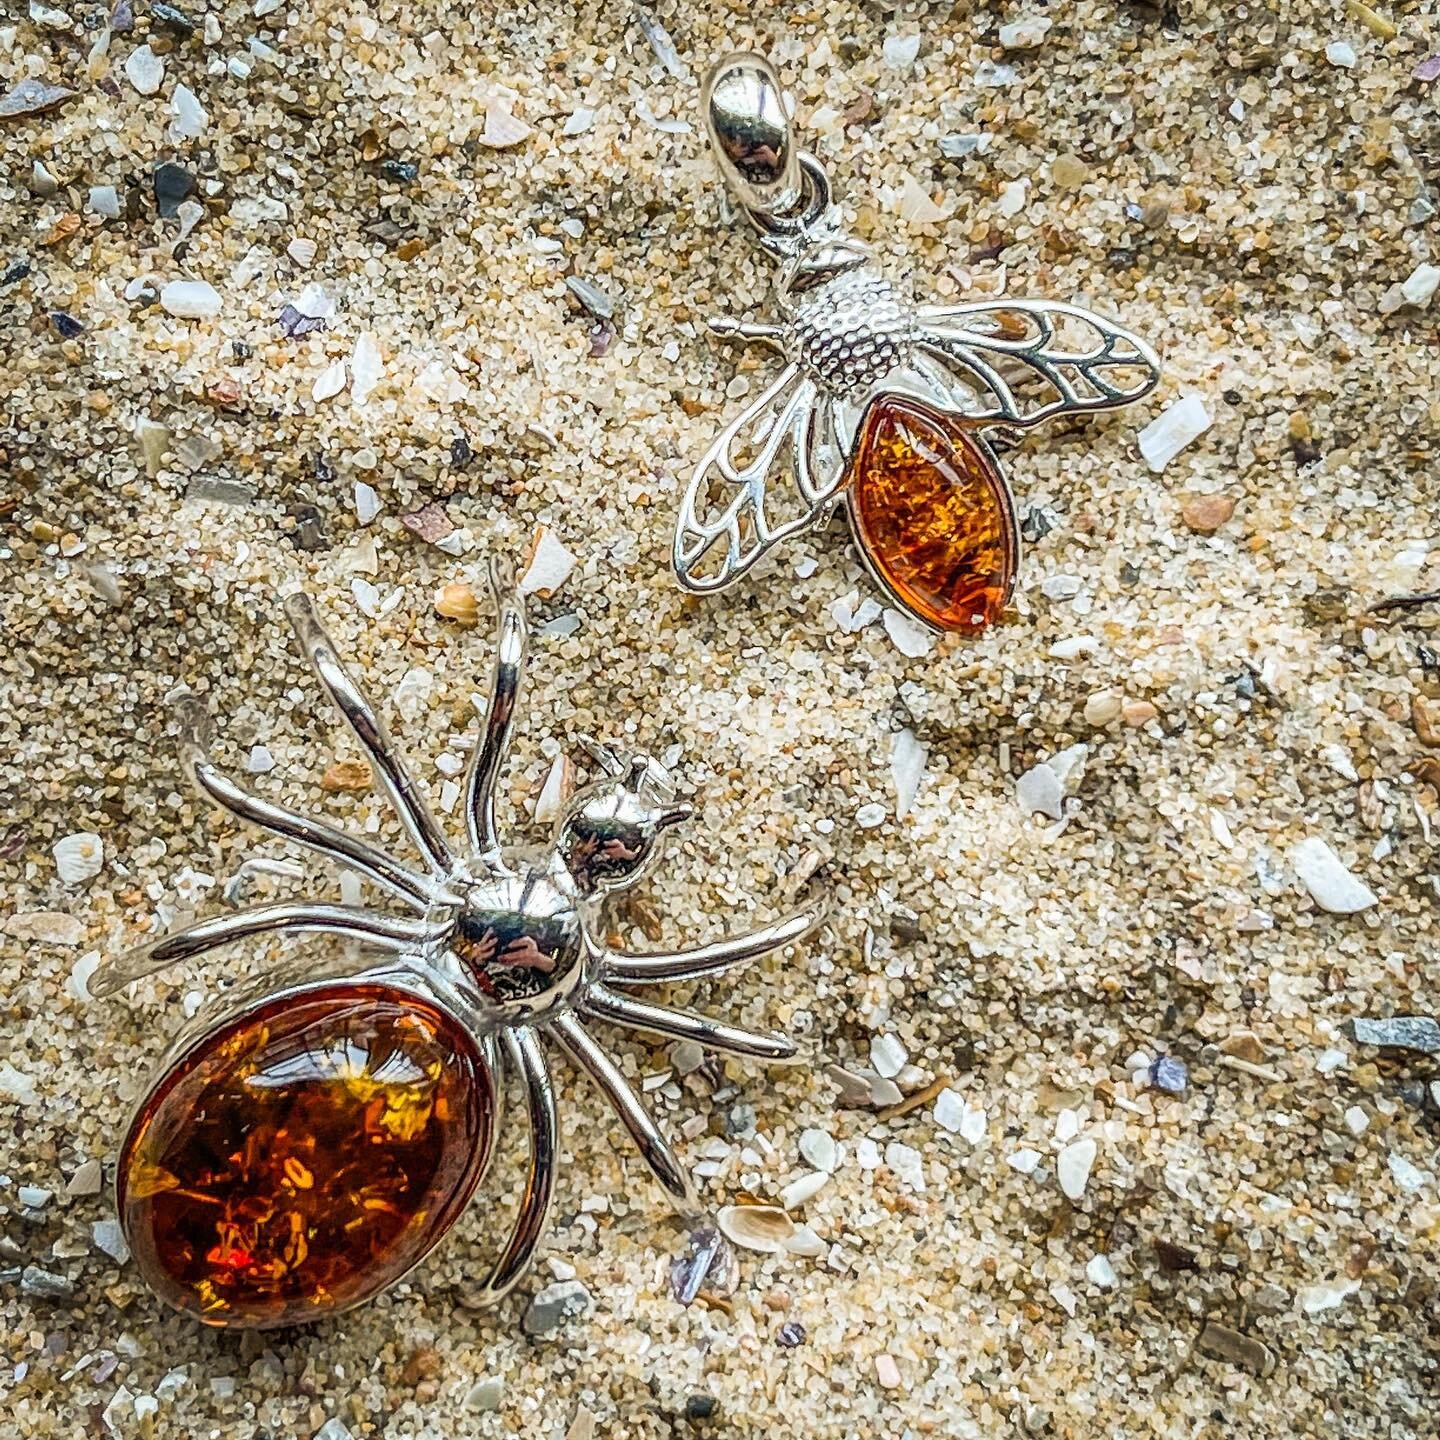 New amber stock arriving daily, like these stunning insects set in sterling silver. Check in store for full range. 

#amber #amberjewellery #amberjewelry #balticamber #insectjewelry #bee #spider #independant #independantbusiness #icenine #nottingham